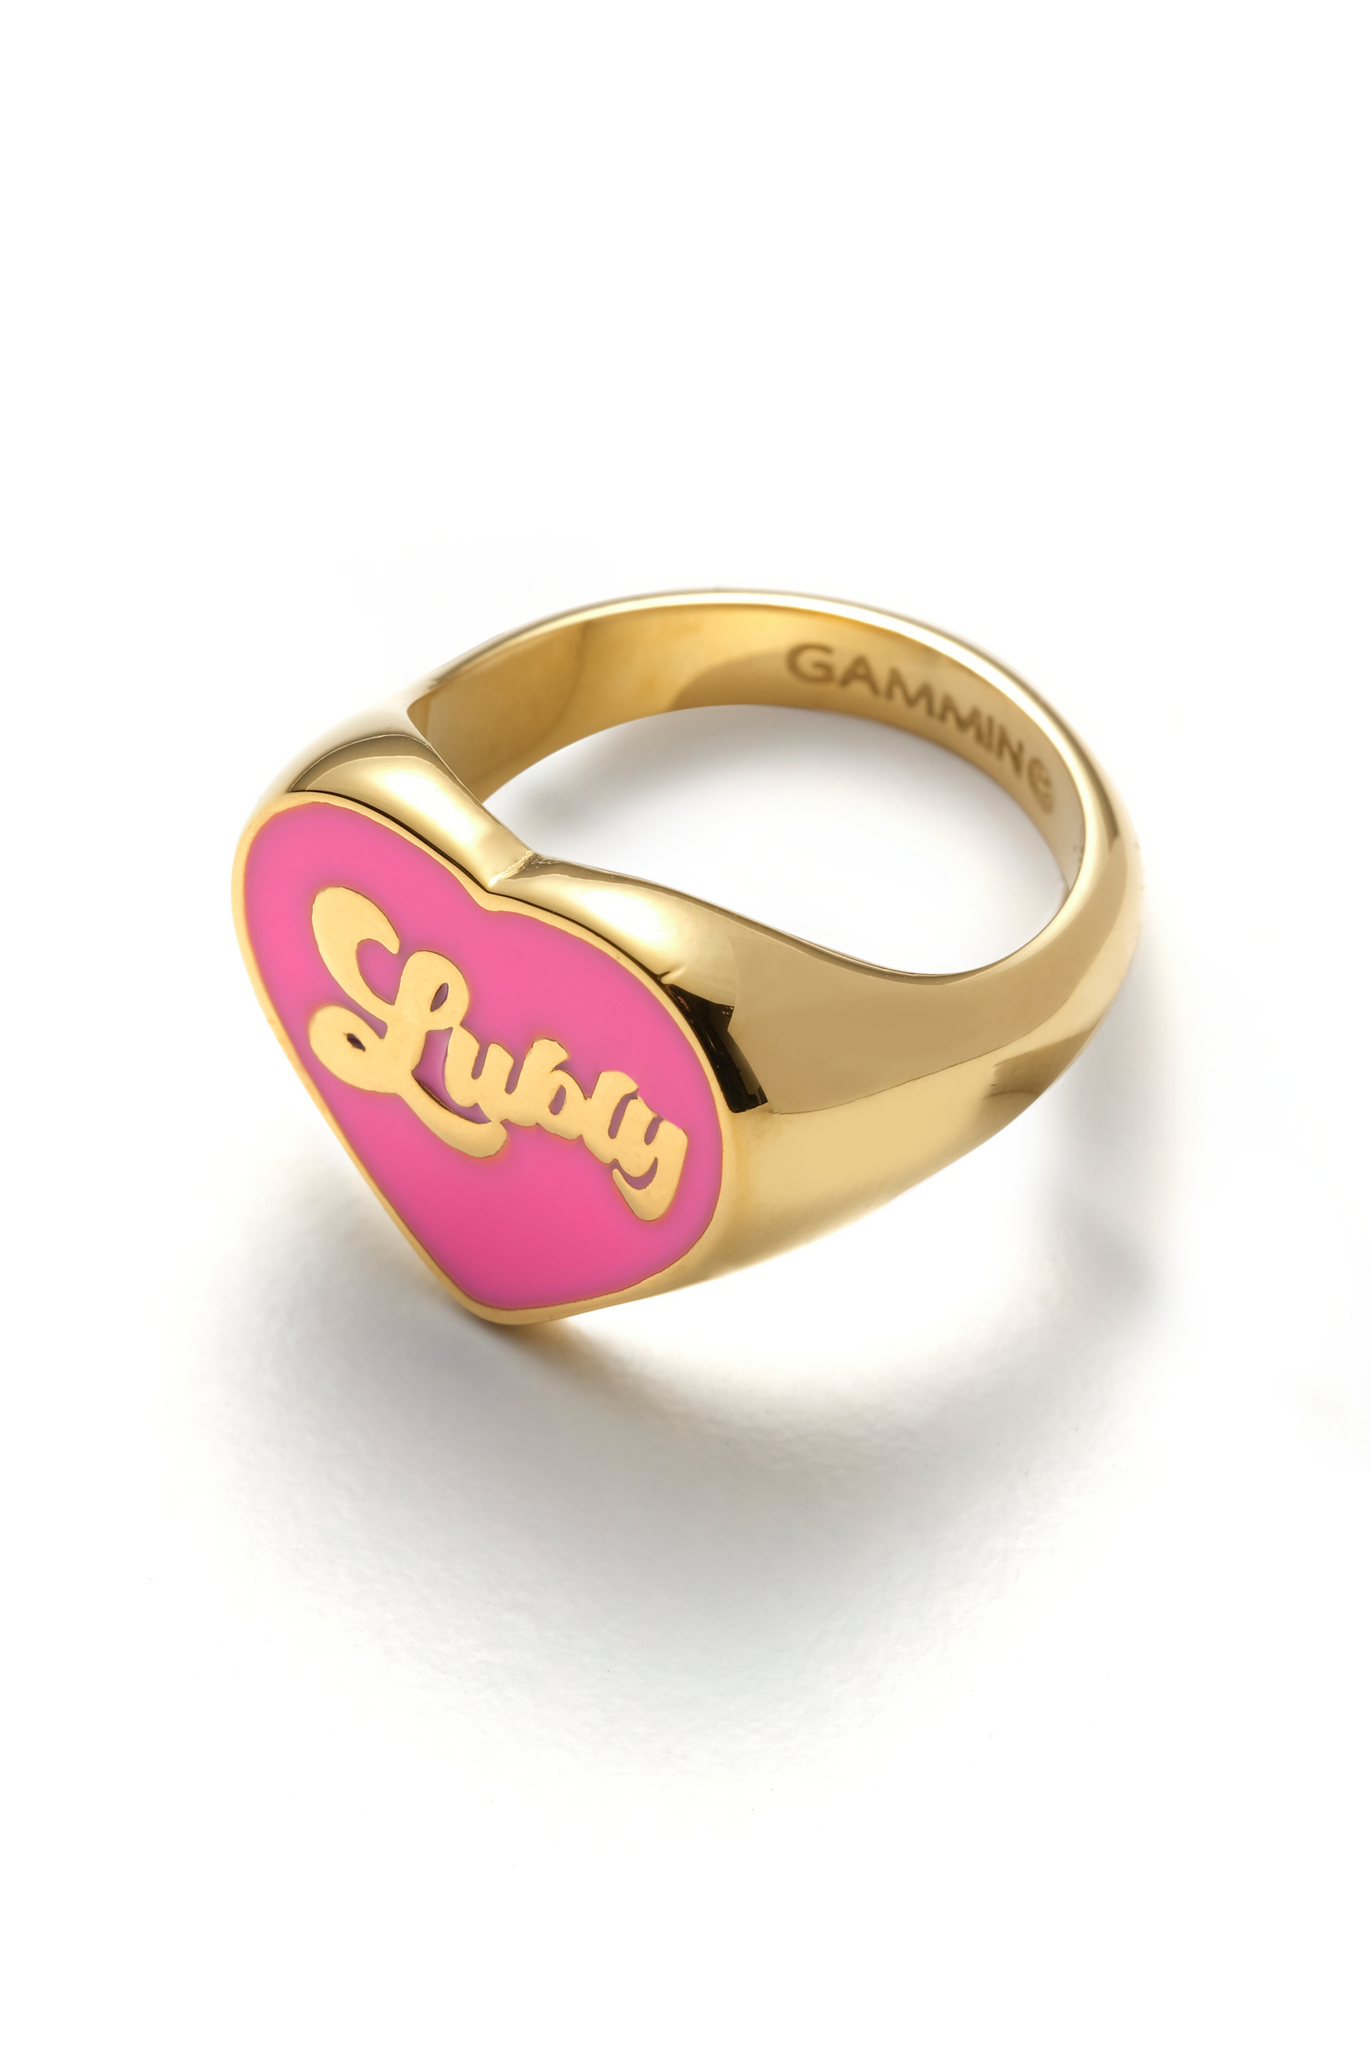 Lubly heart ring